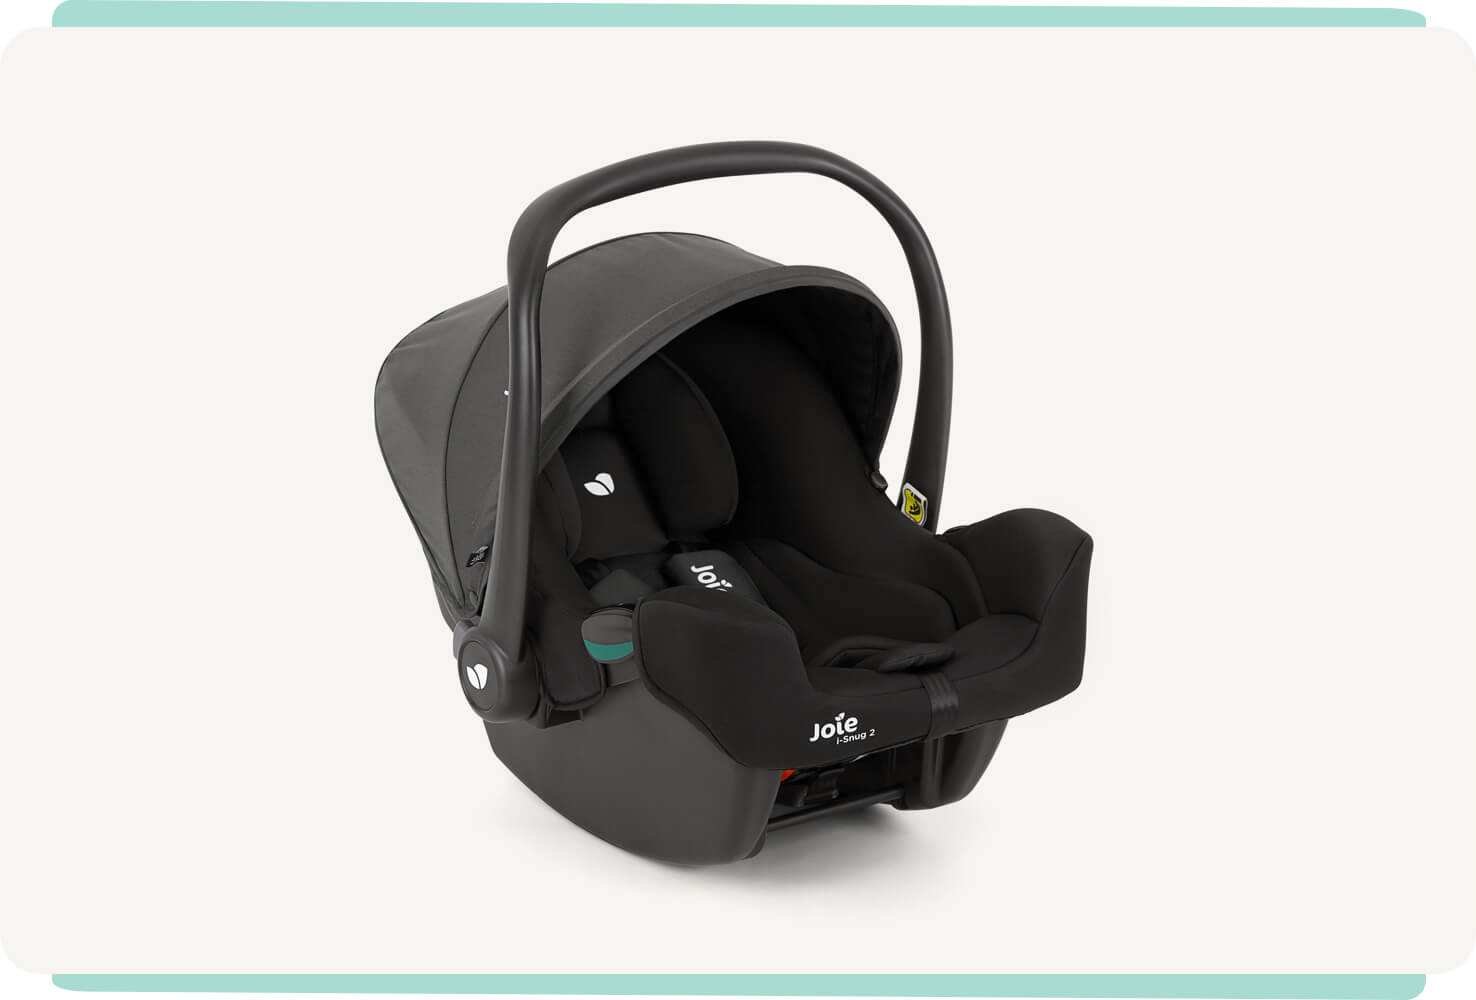 Joie I-snug 2 infant car seat in a two-tone black colour with canopy and handle up on a right angle position.